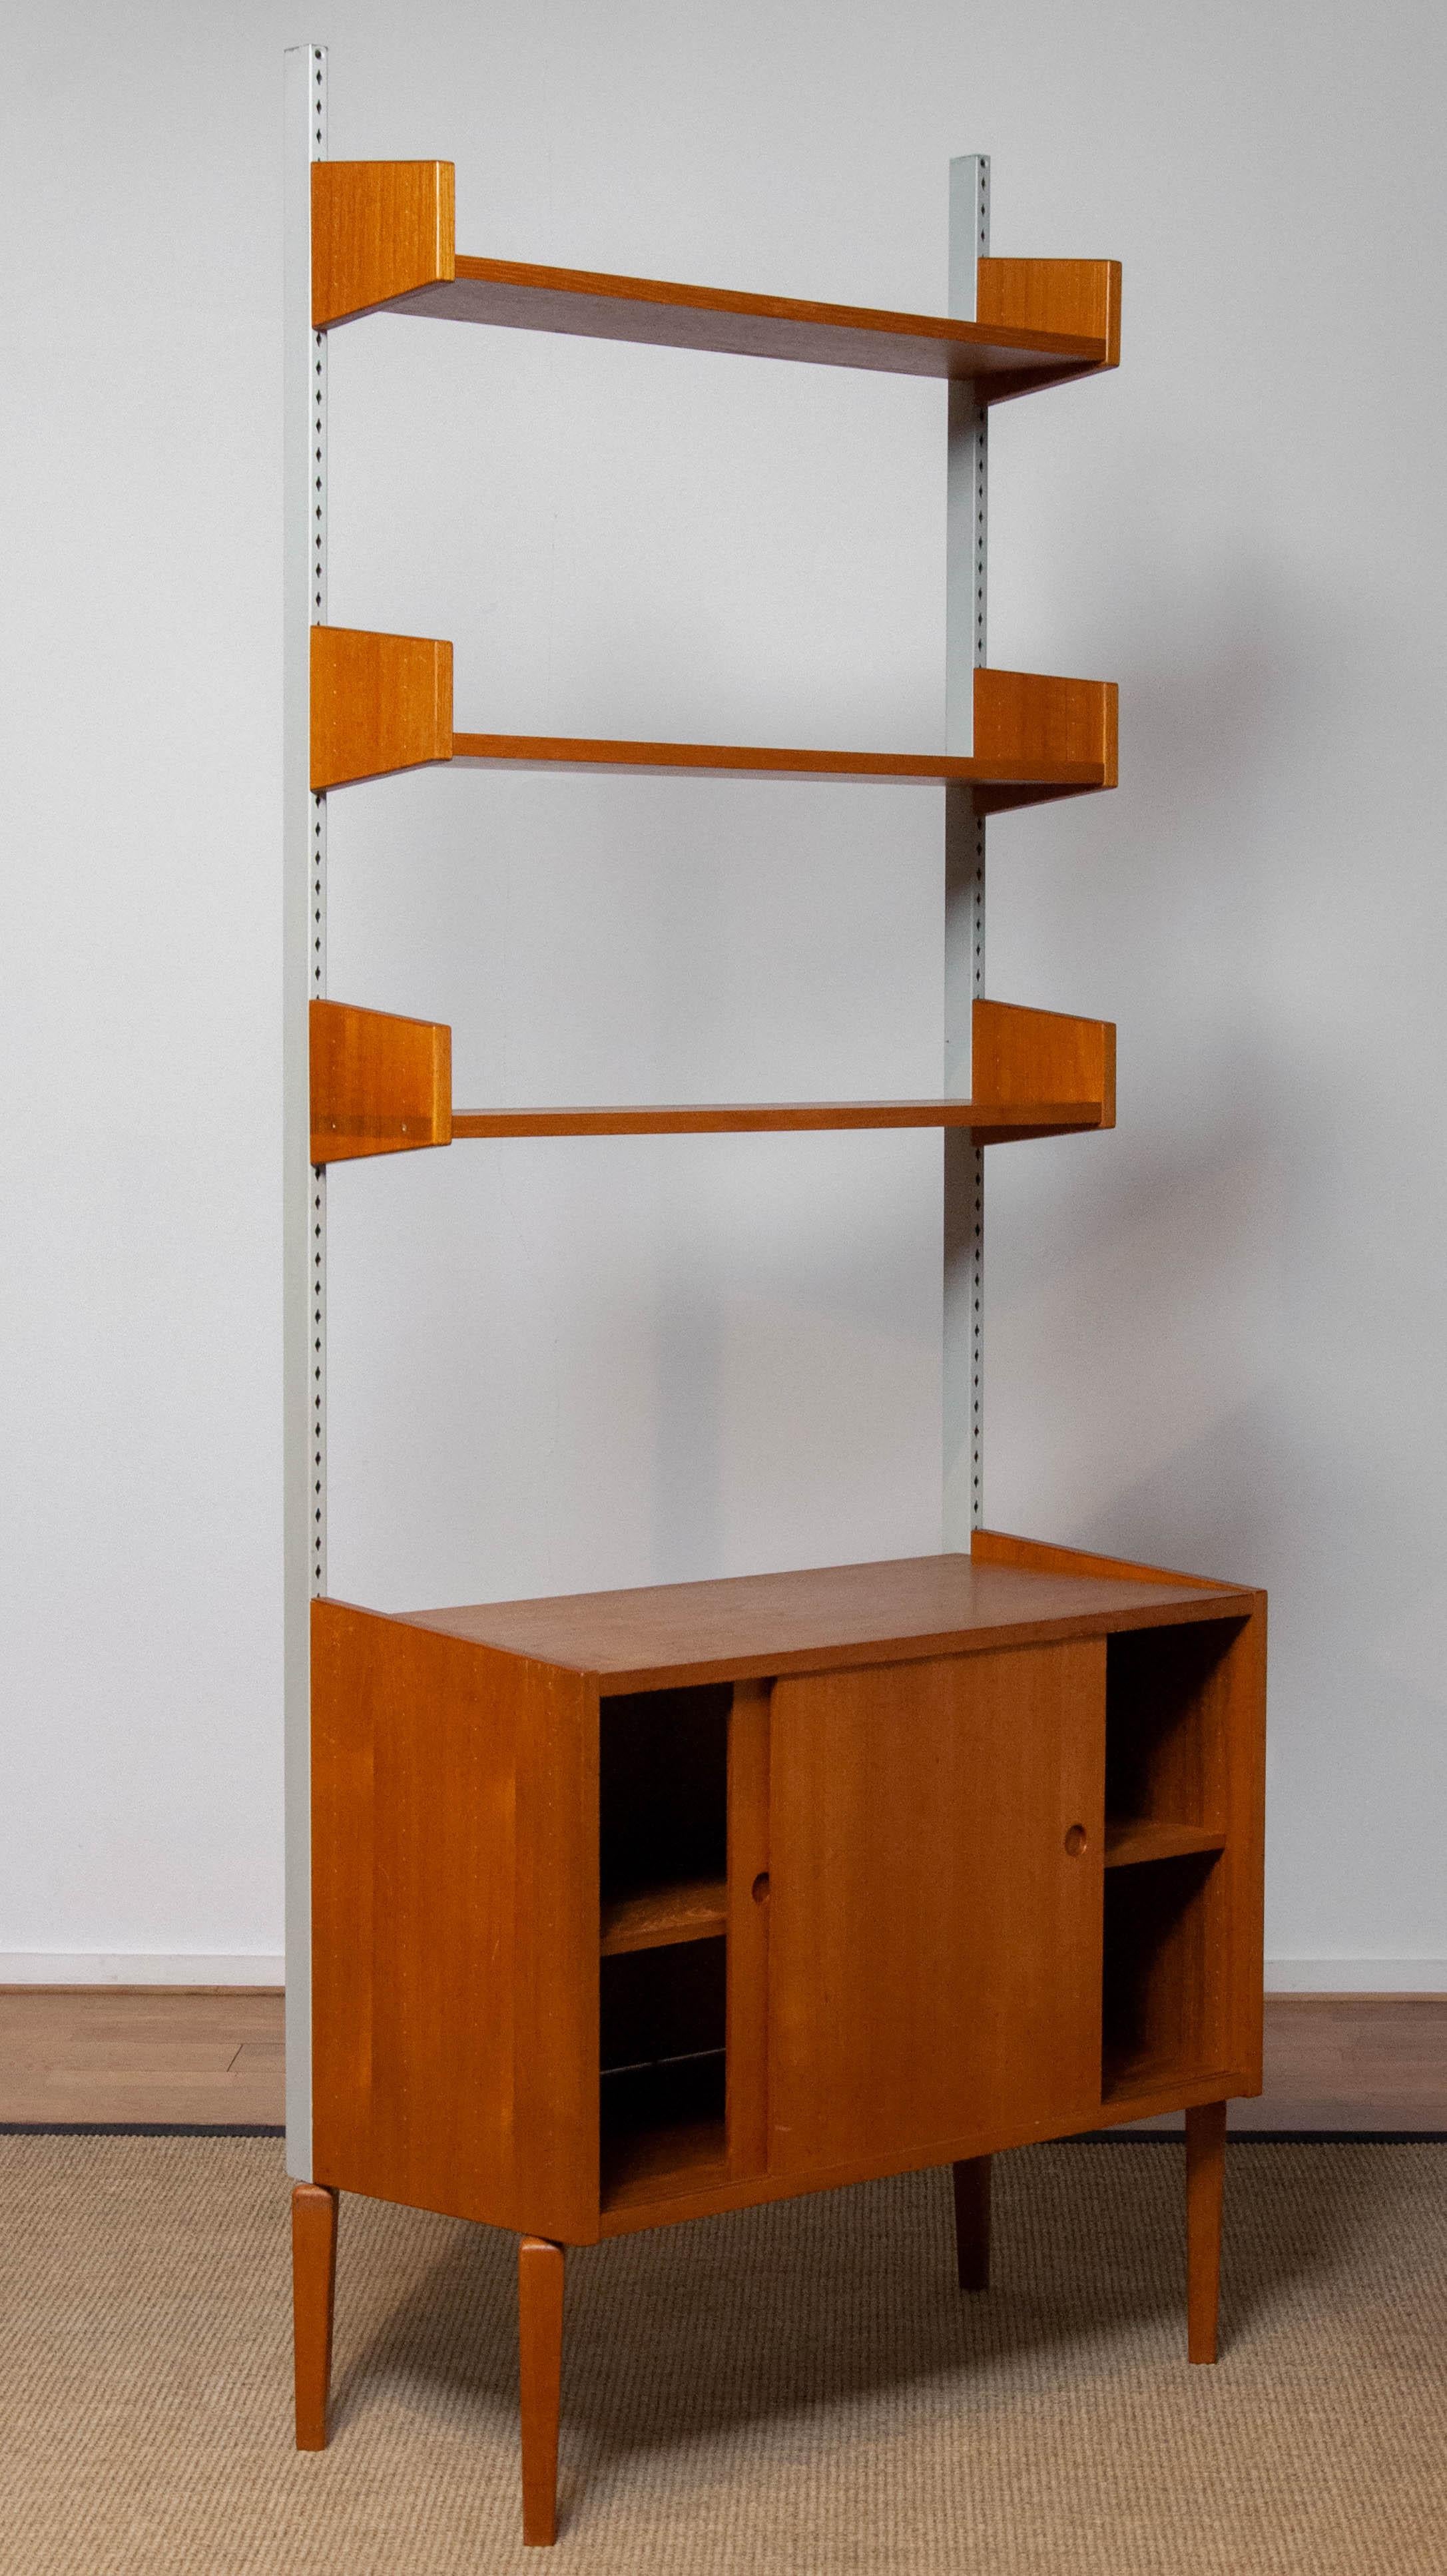 Mid-20th Century 1950's Teak Shelf System / Bookcase in Teak with Steel Bars by Harald Lundqvist For Sale